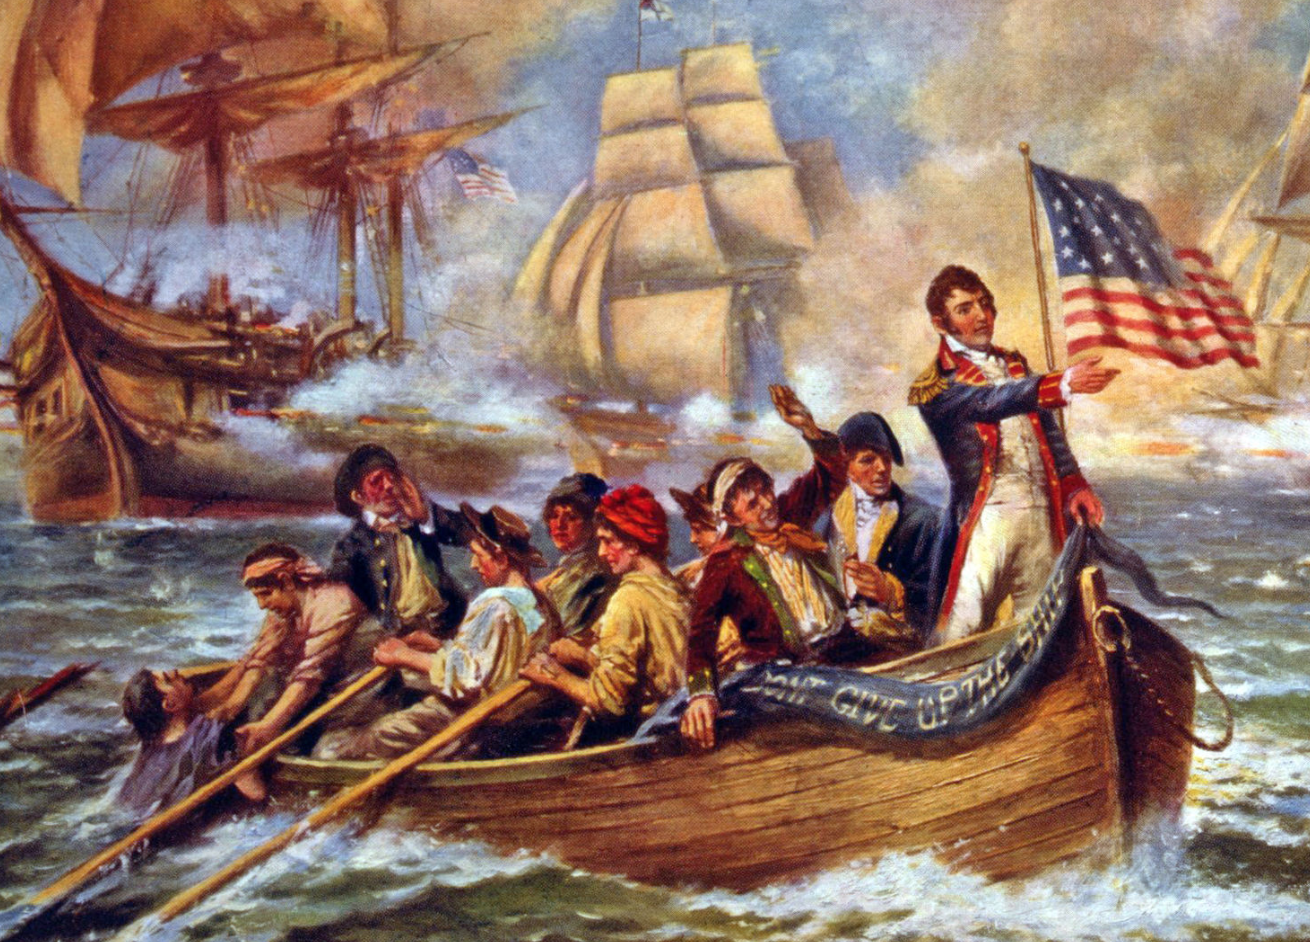 Oliver Hazard Perry at the Battle of Lake Erie. (Wikimedia Commons)